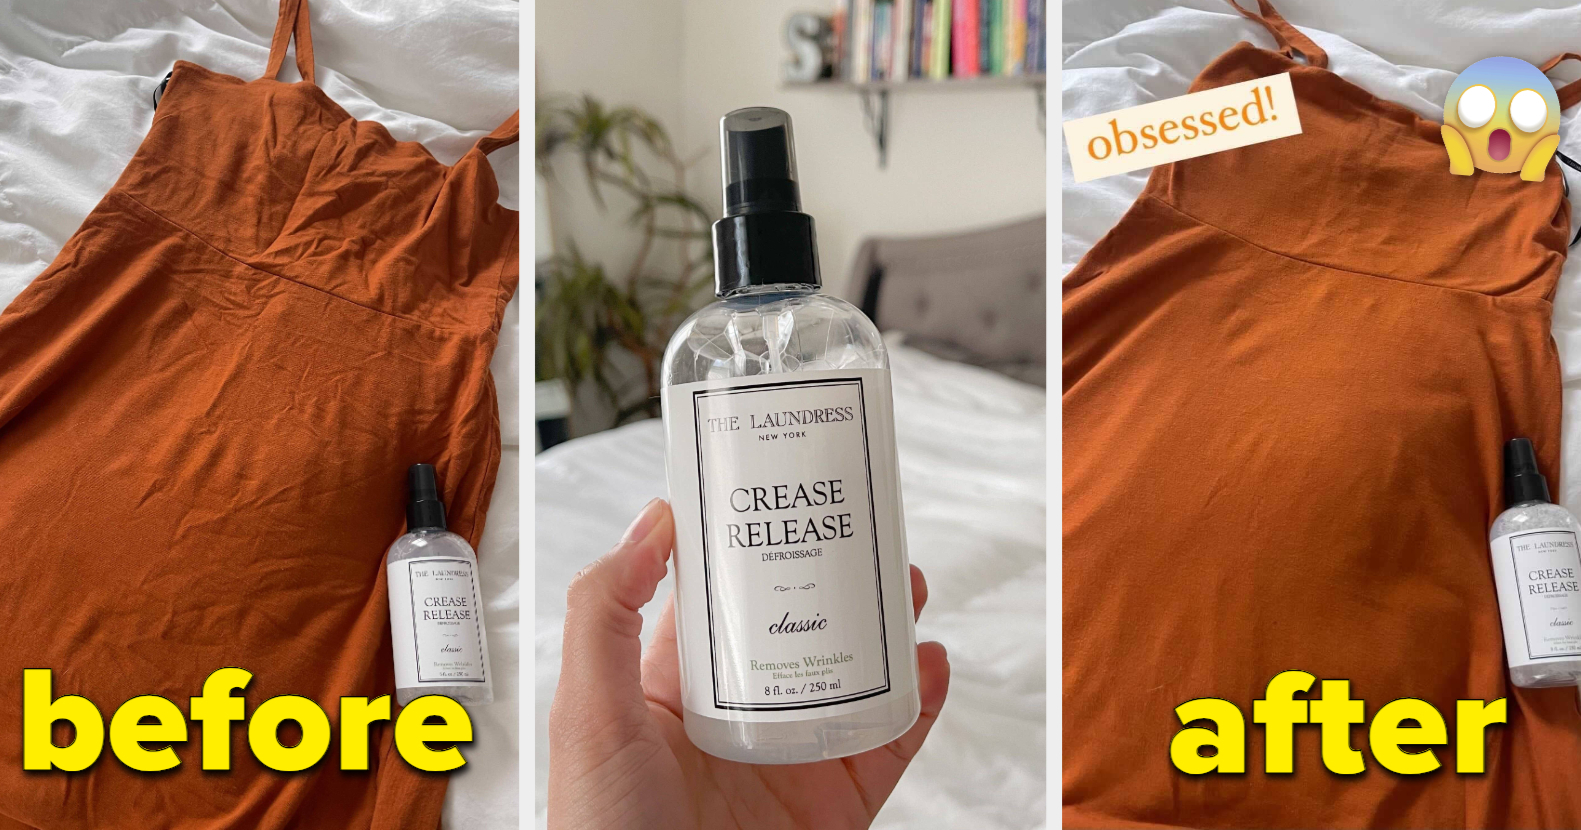 Review: The Laundress Crease Release Spray Really Works